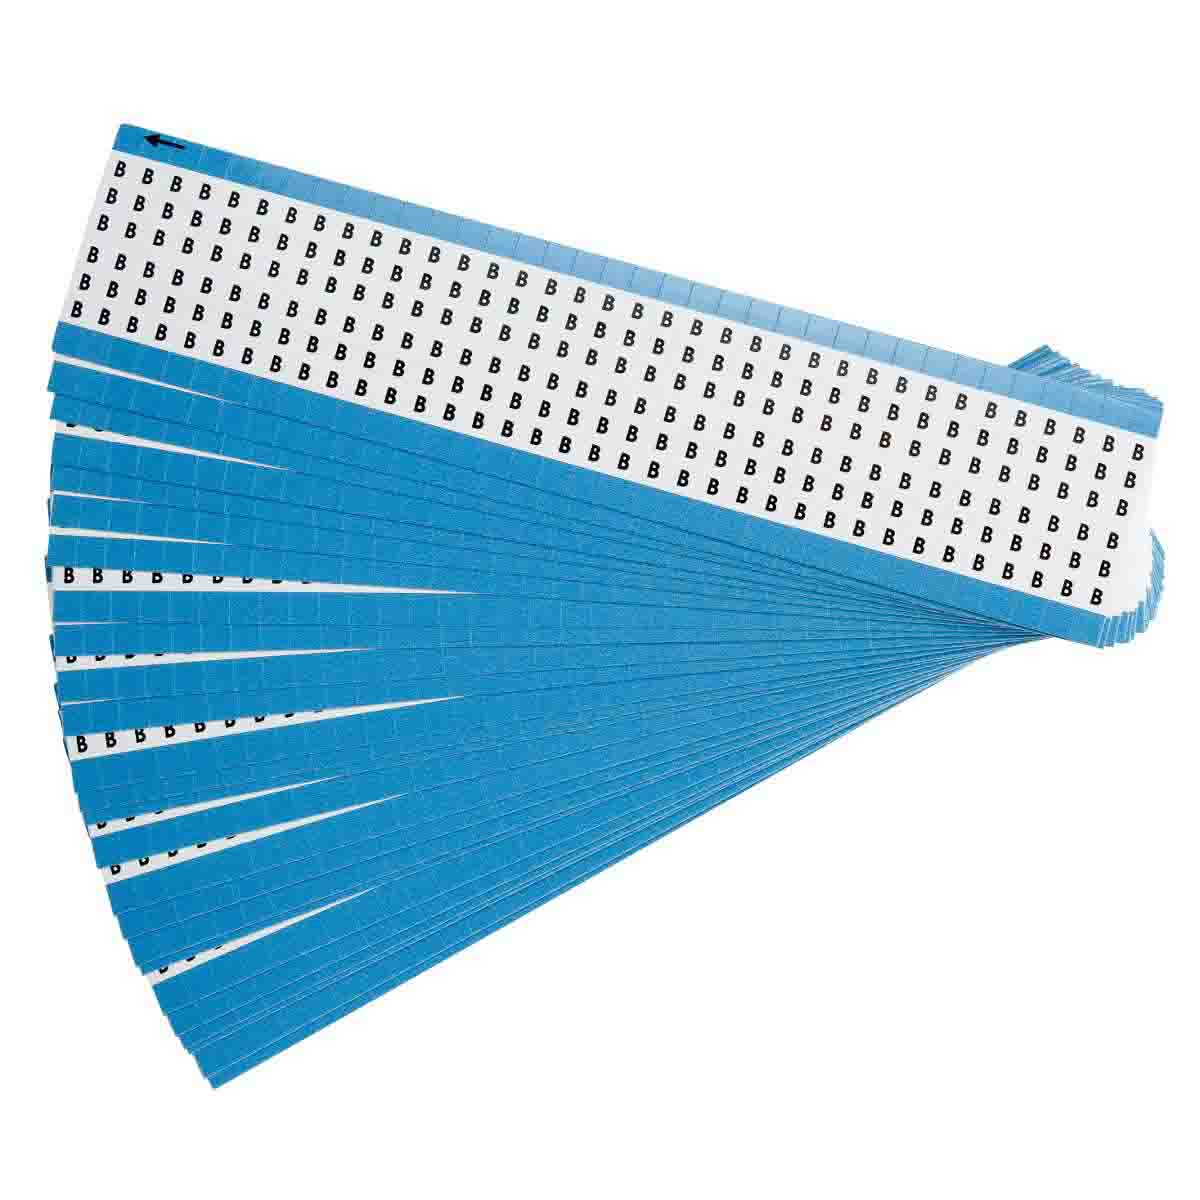 25 Cards Black on White B-500 Brady WM-400-424-PK Repositionable Vinyl Cloth Consecutive Numbers Wire Marker Card 